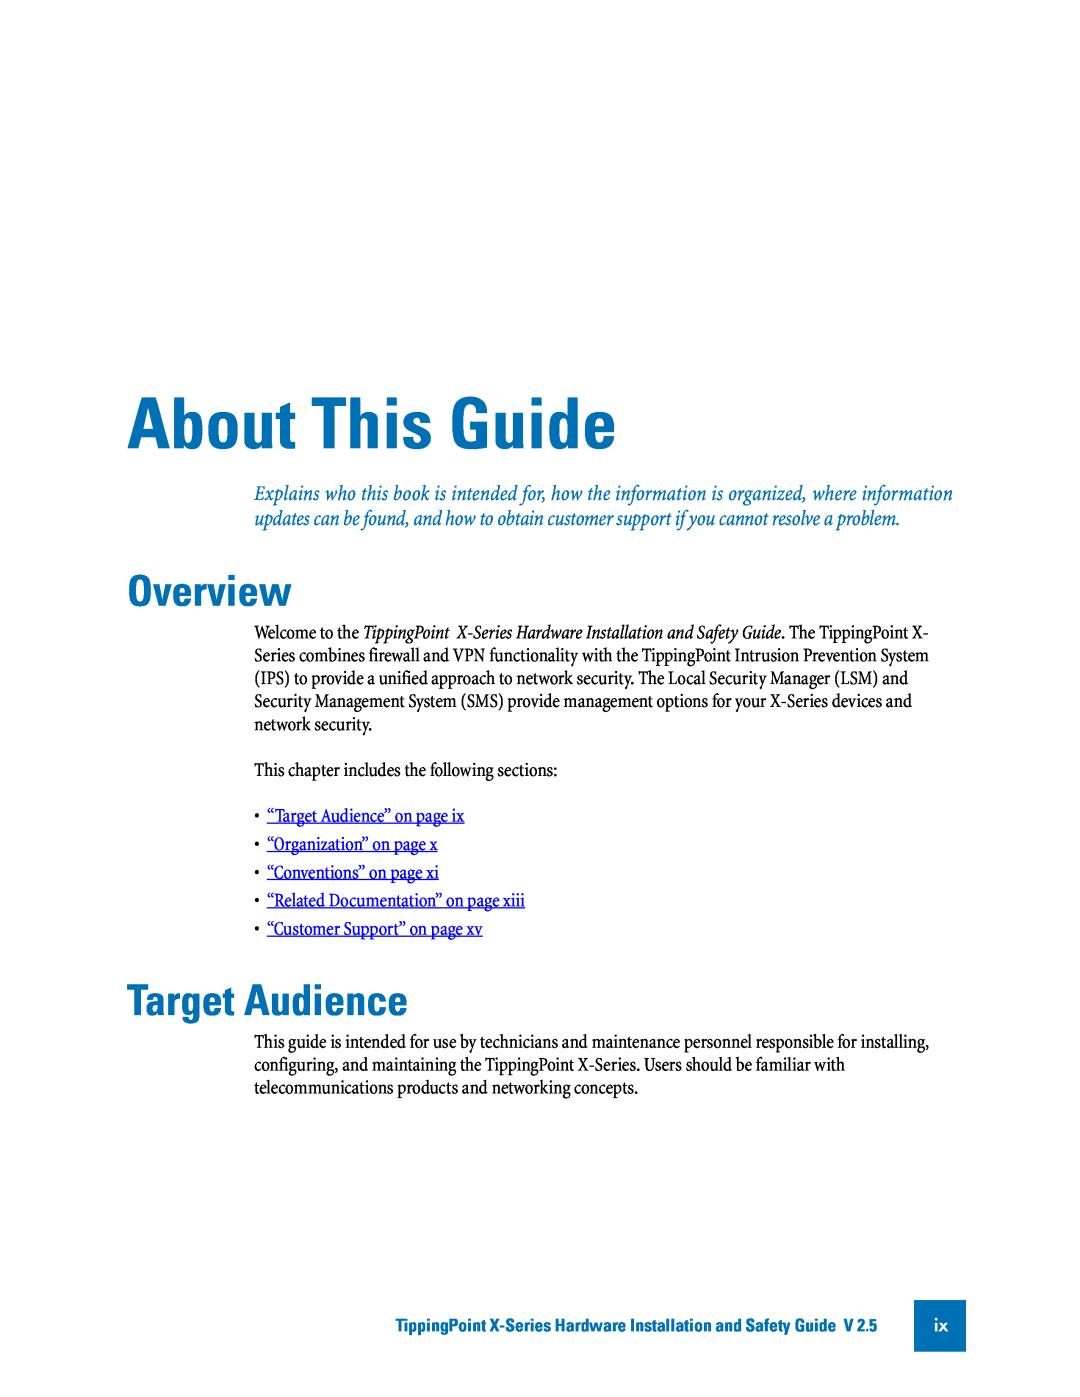 3Com TECHD-0000000122 manual About This Guide, Overview, “Target Audience” on page, “Related Documentation” on page 